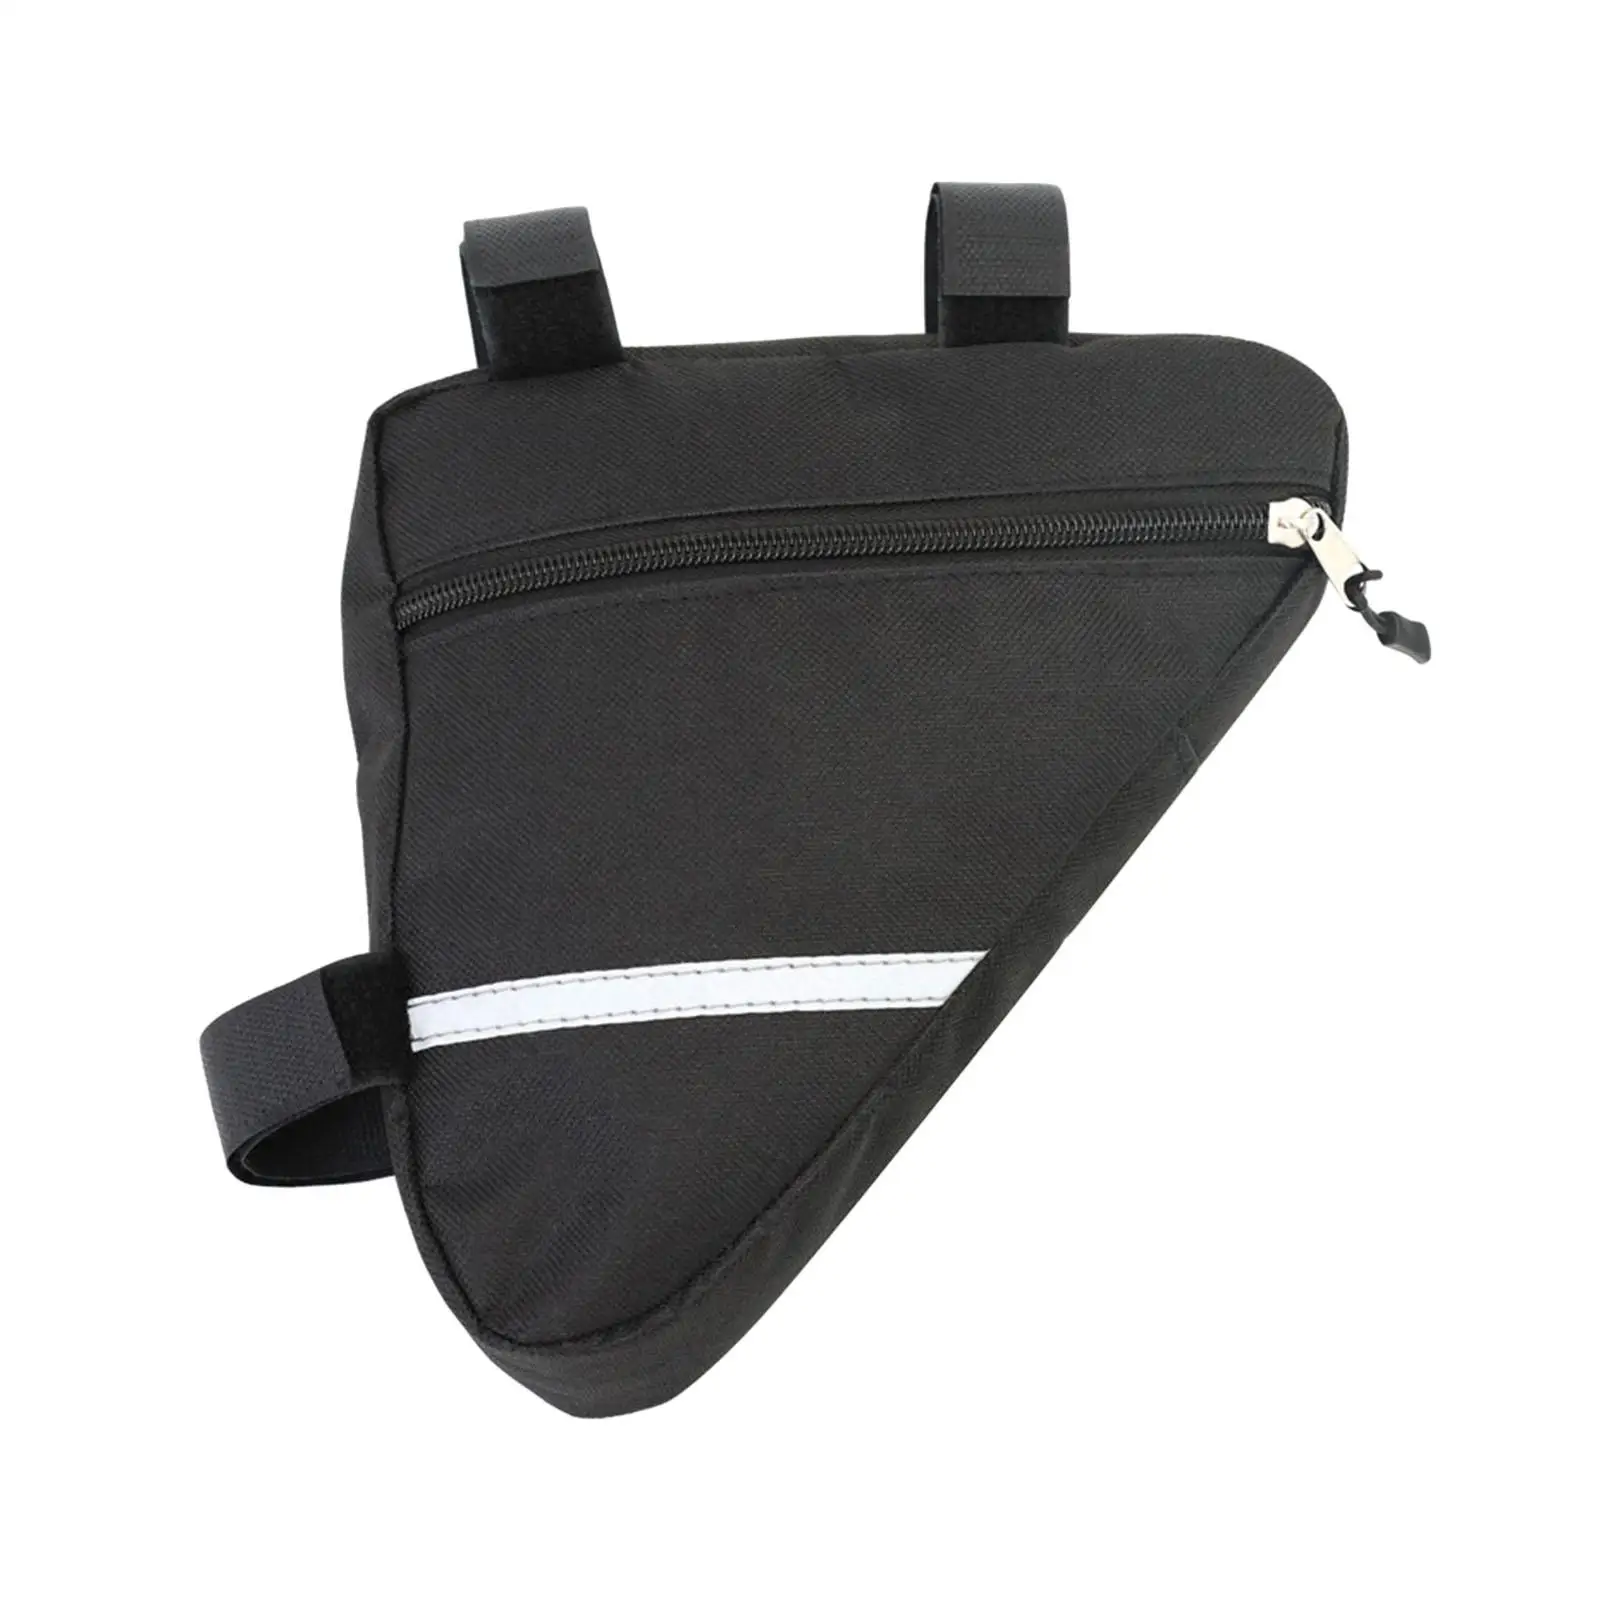 Bike Frame Bag Cycling Bicycle Pouch Accessories Saddle Bag Connects Frame Equipment Tube Pouch for Keys Outdoor Activities